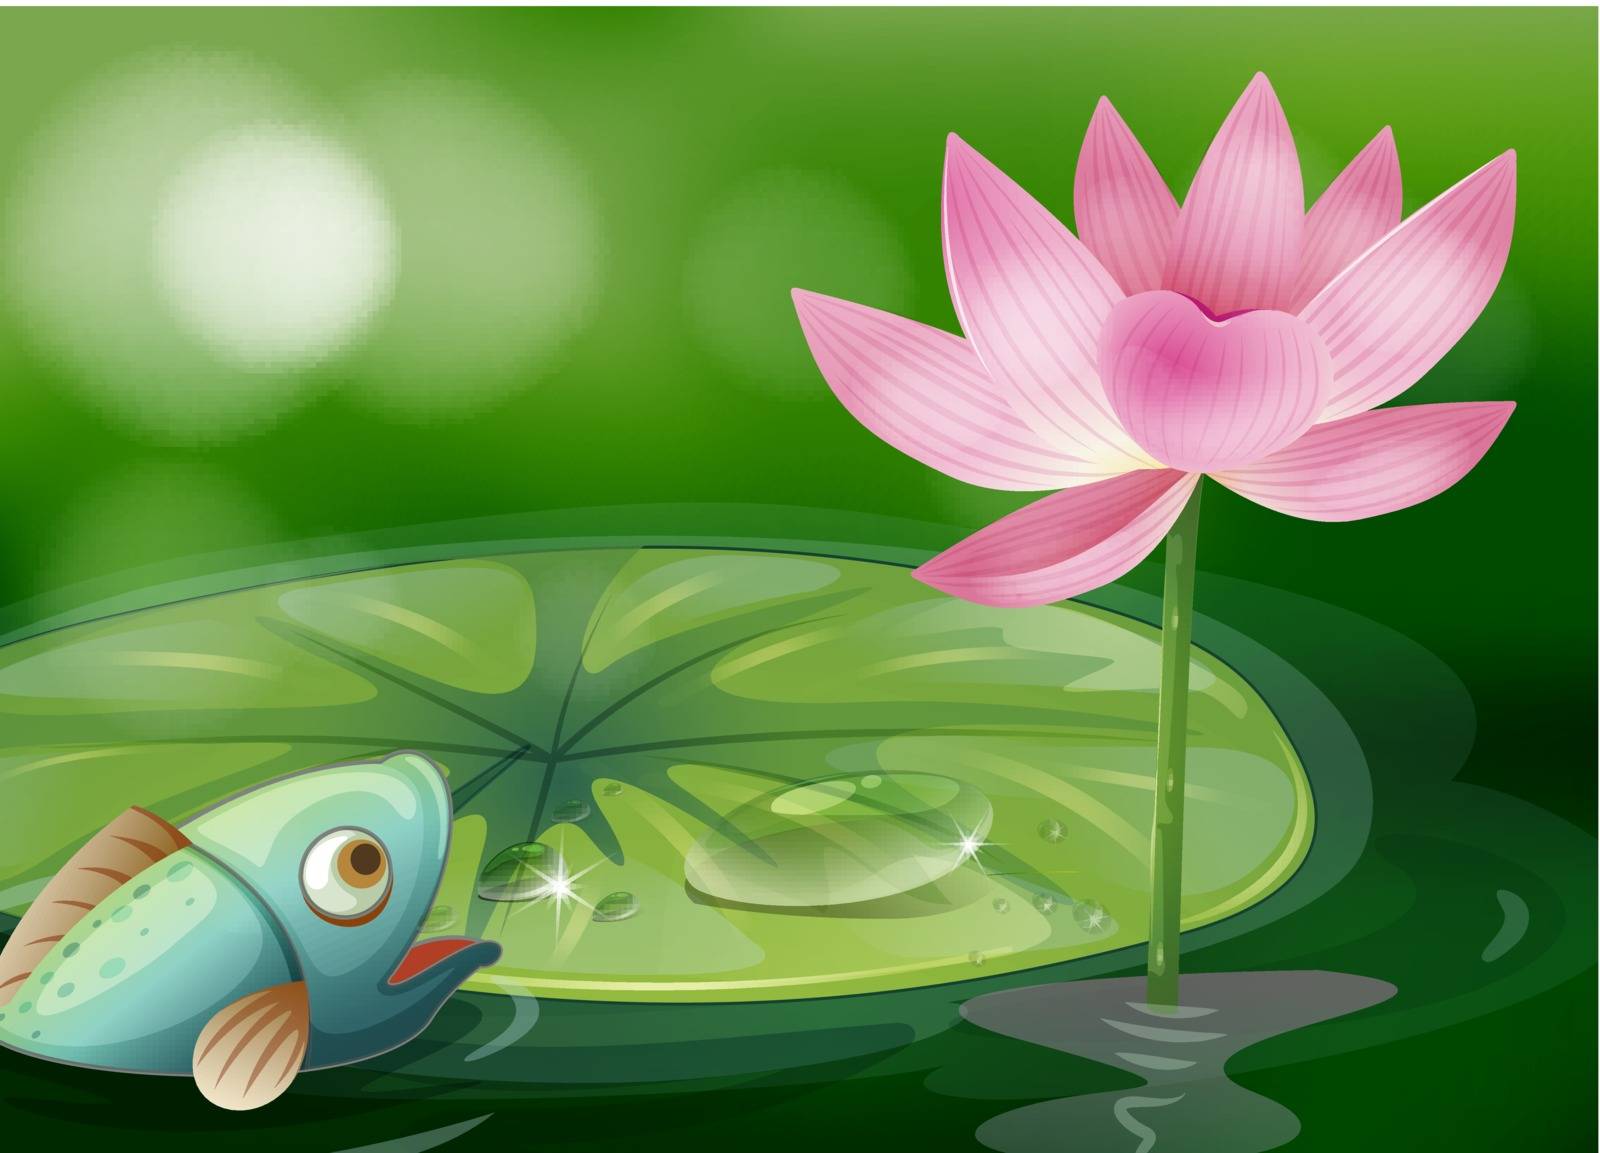 Illustration of a fish with a waterlily and a flower at the pond